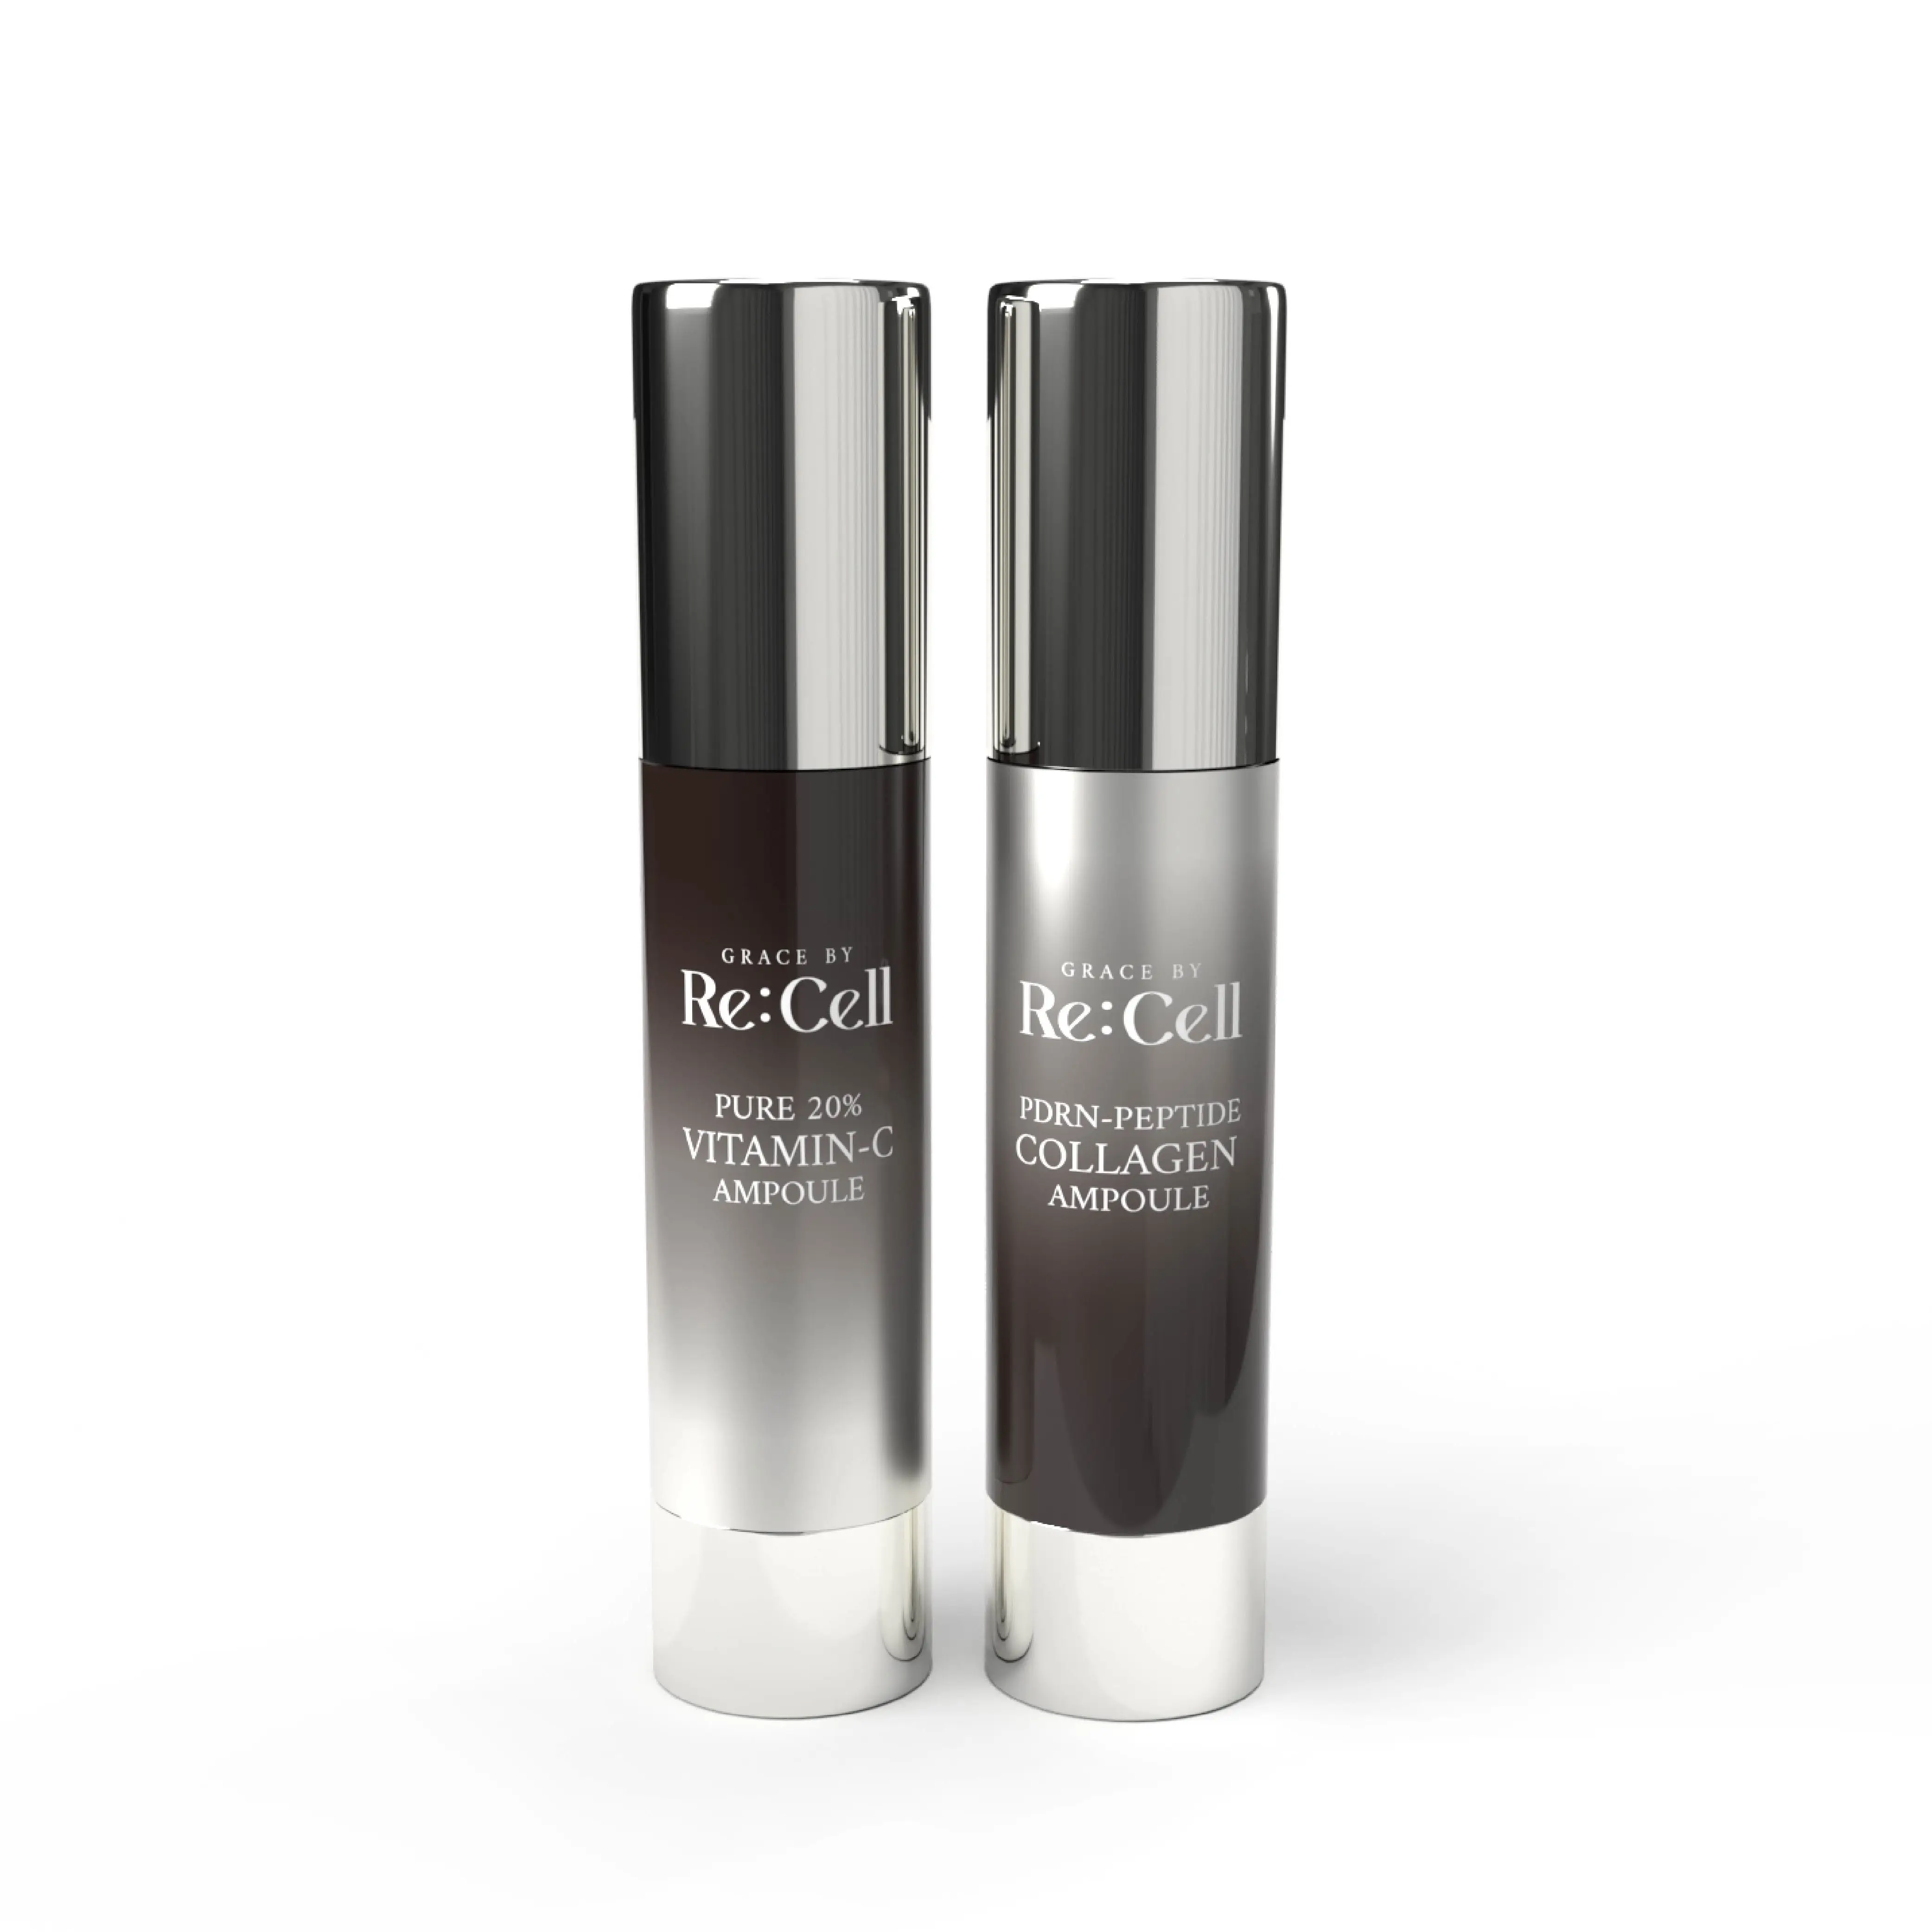 New beauty product Korean Skincare Product OEM ODM Grace by Re:cell OEM ODM Re:Master Duo-Ampoule For Skin Brightening